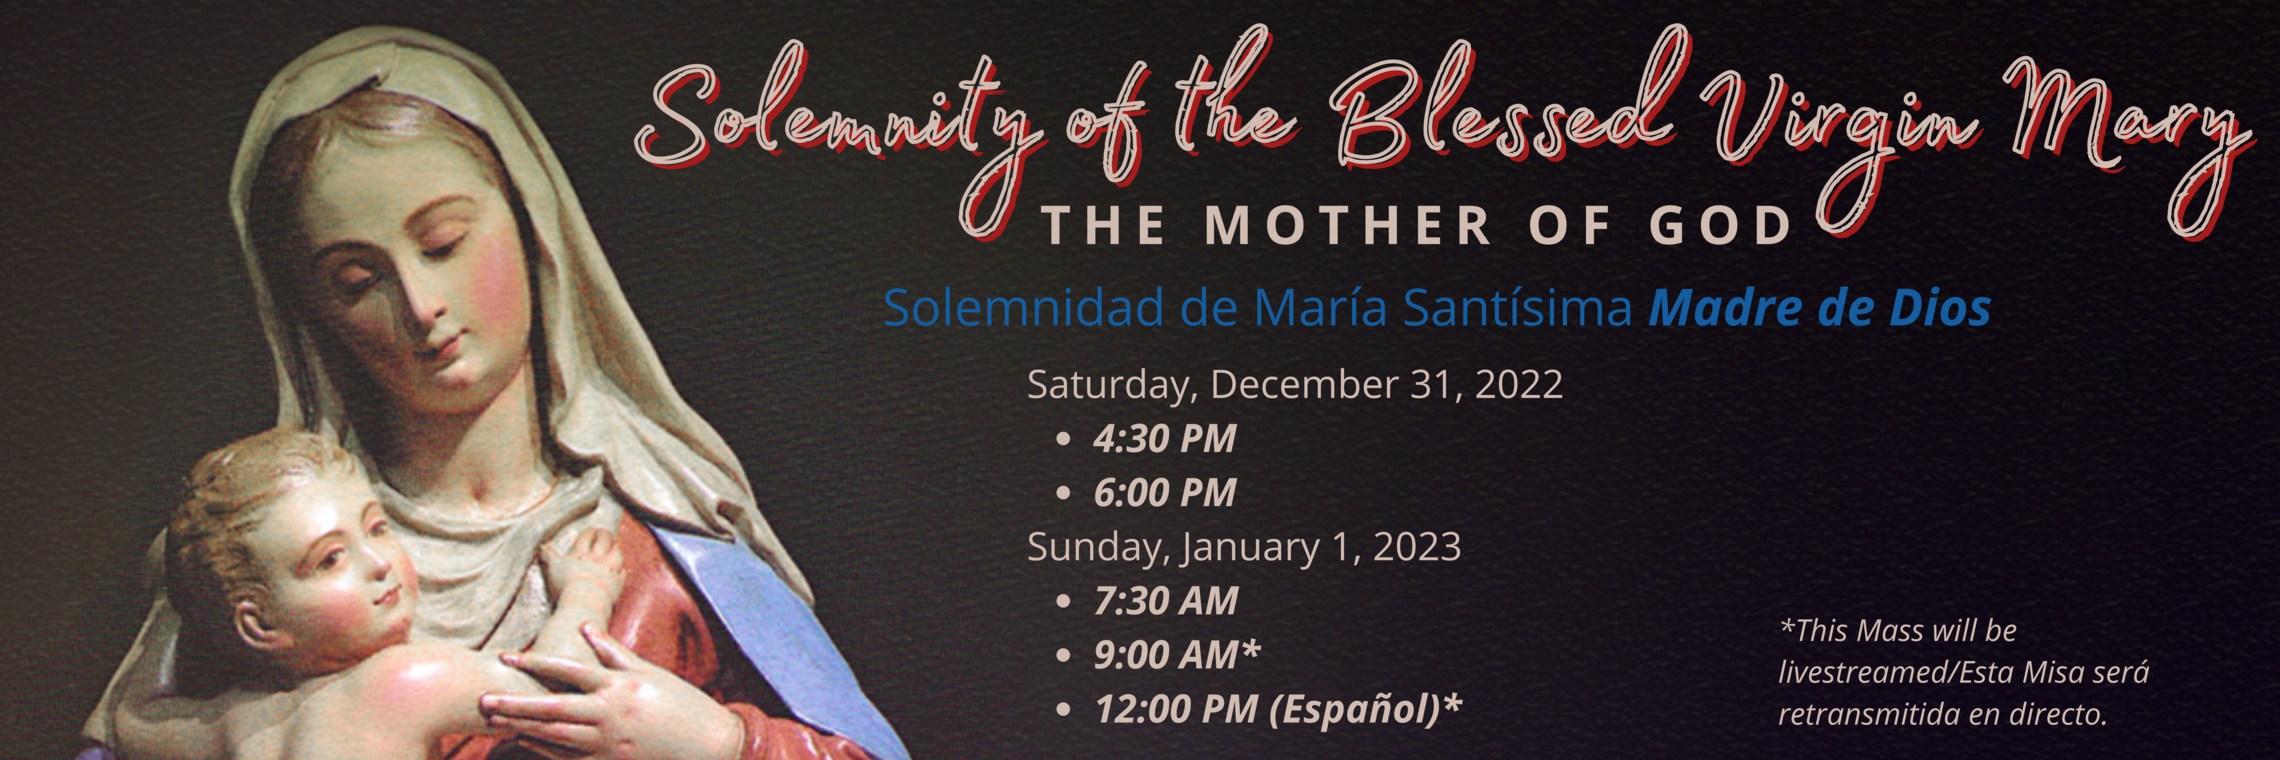 Solemnity Of The Blessed Virgin Mary Web